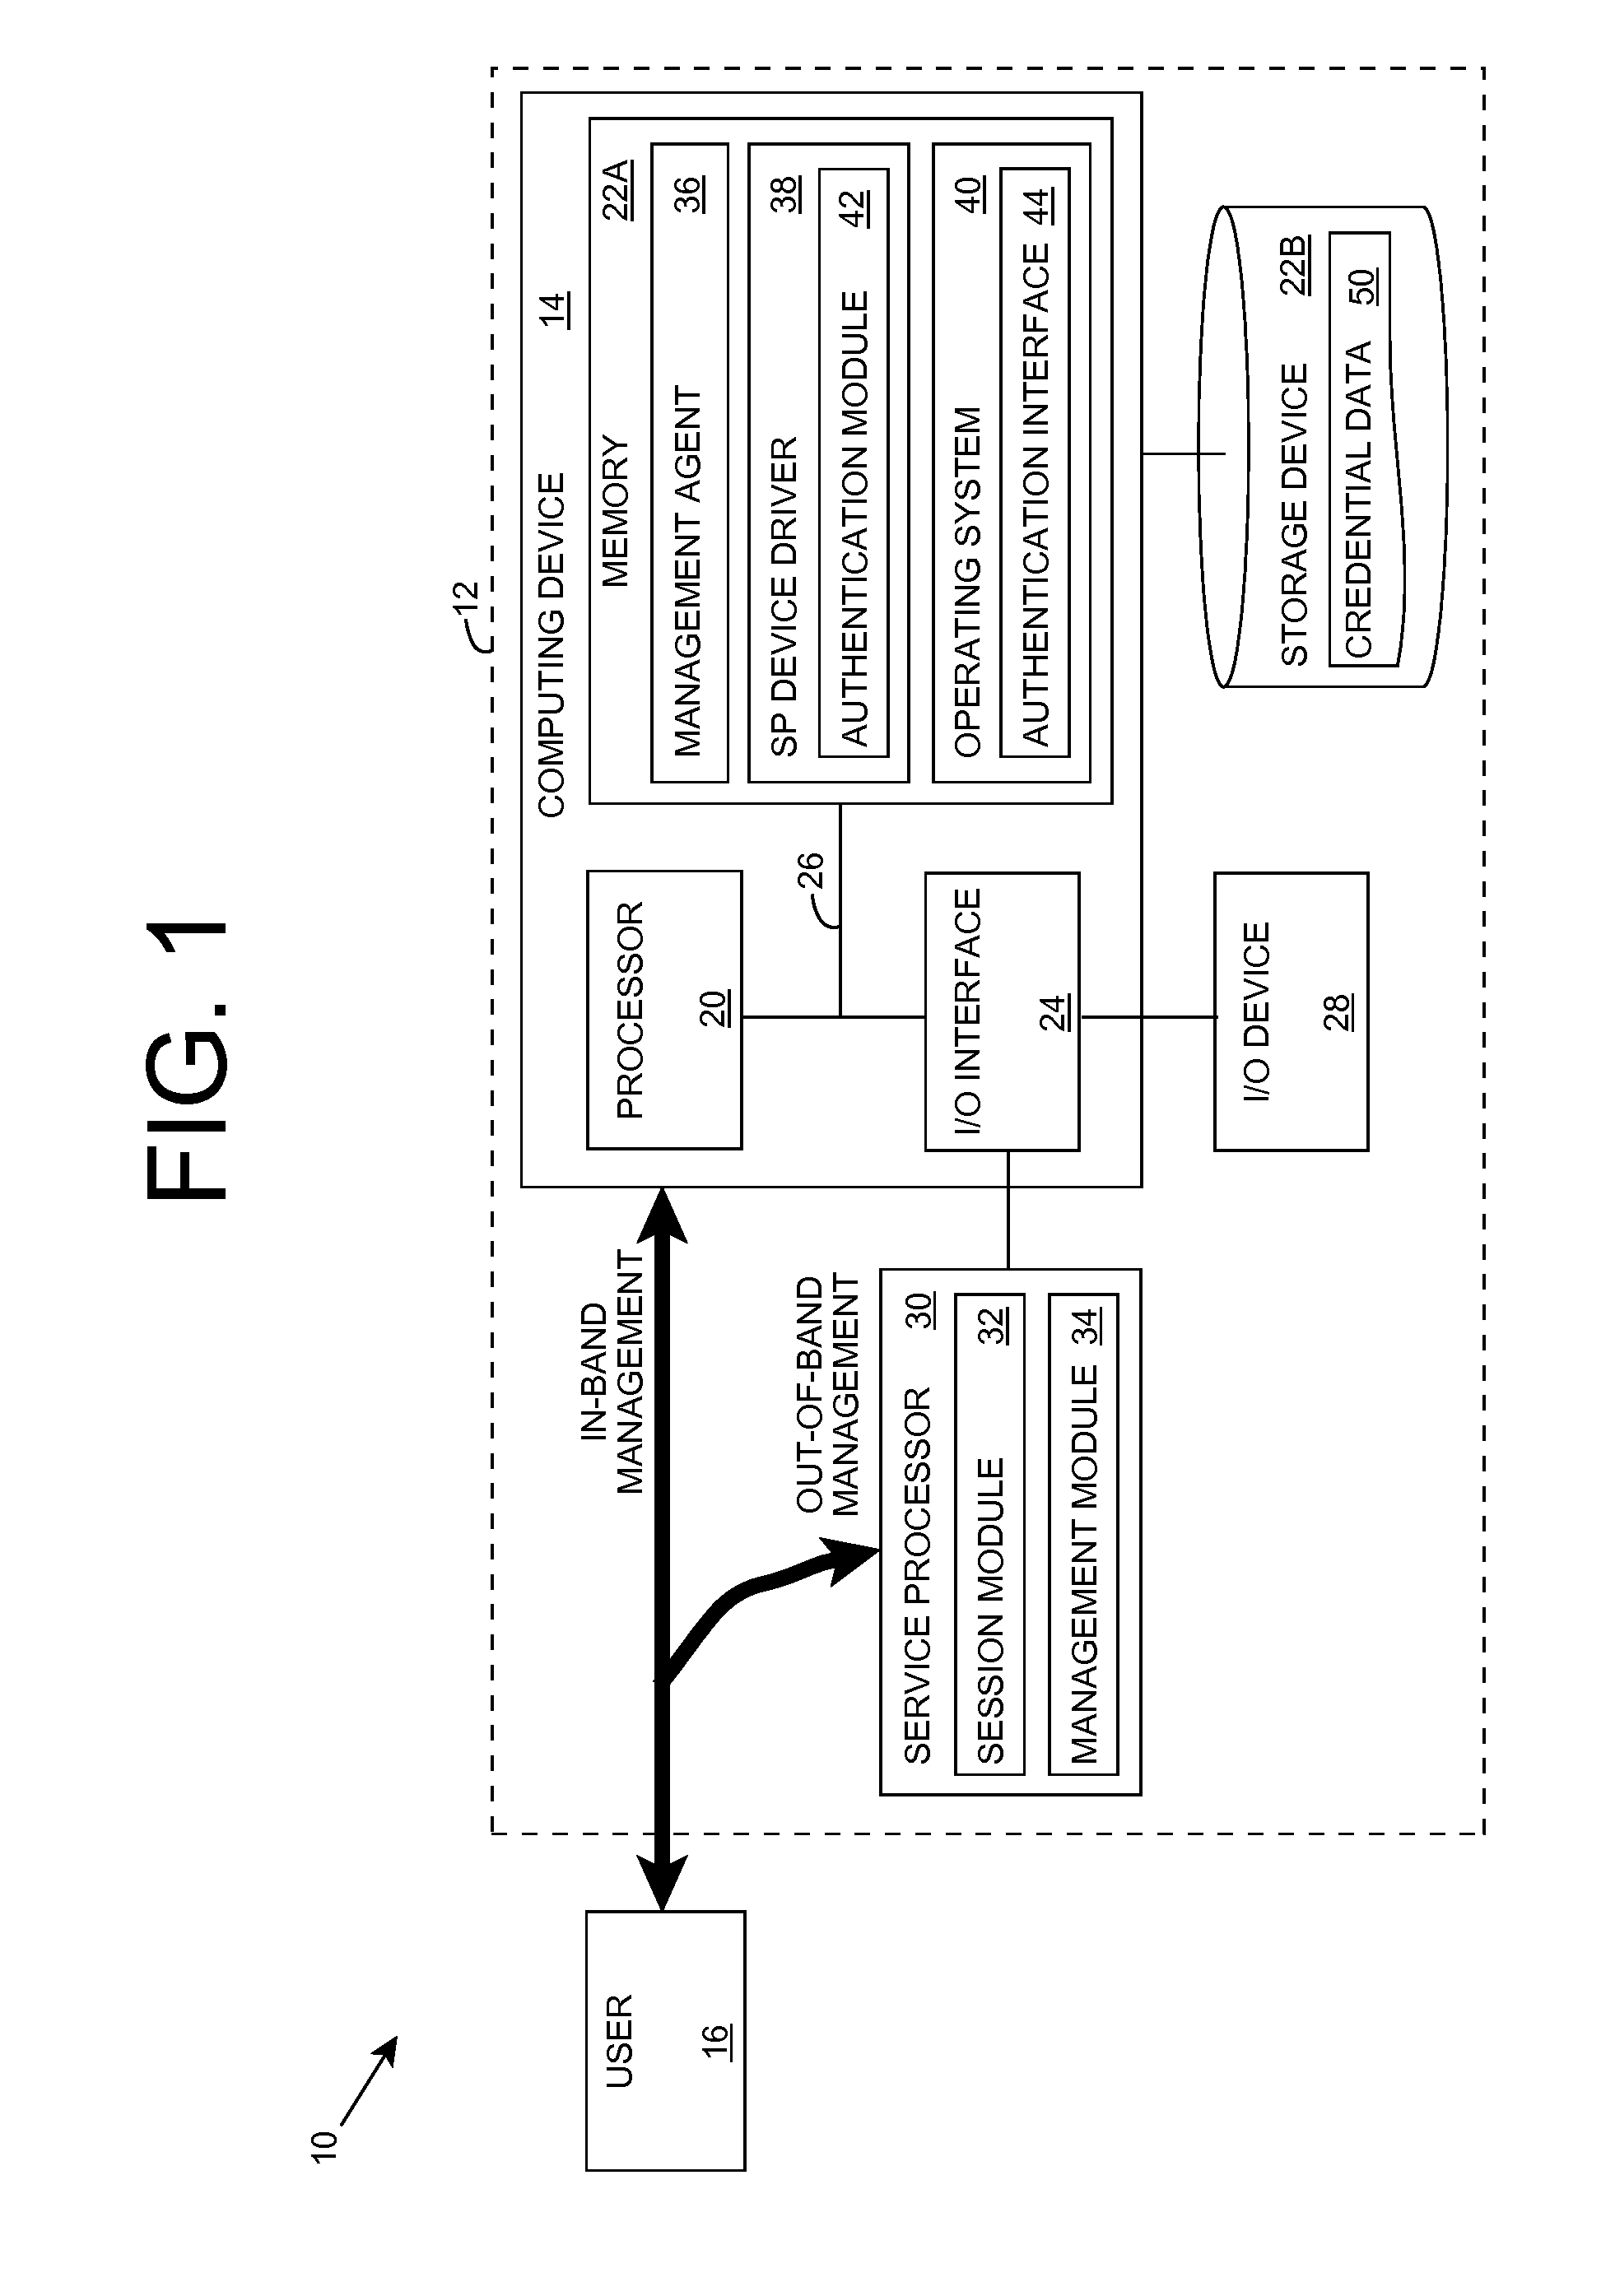 Authentication for computer system management